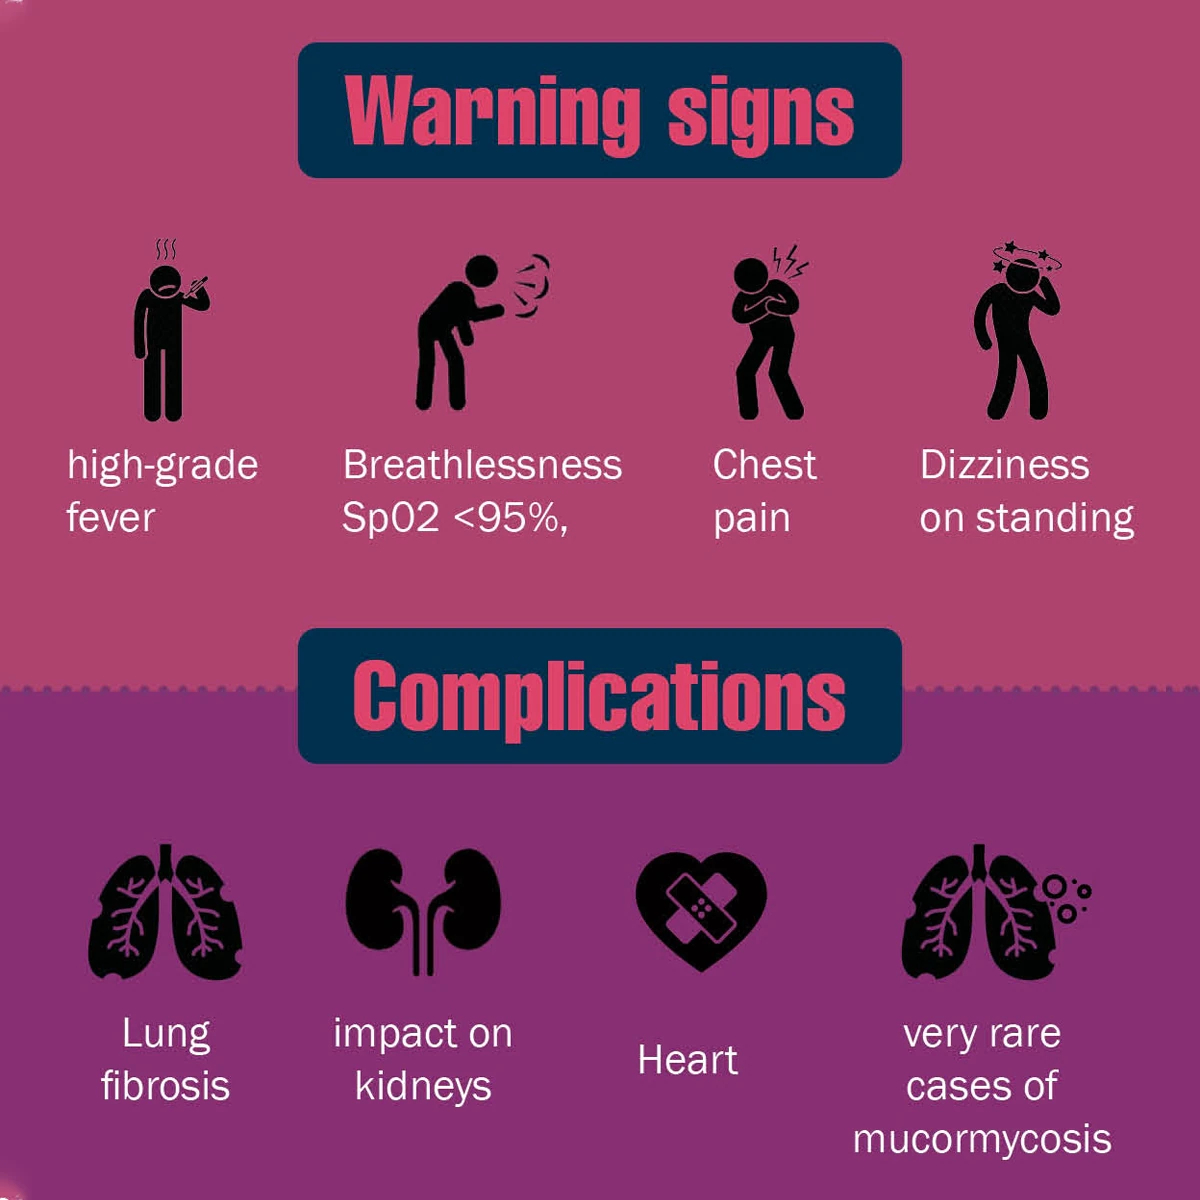 Symptoms and Complication of Covid-19